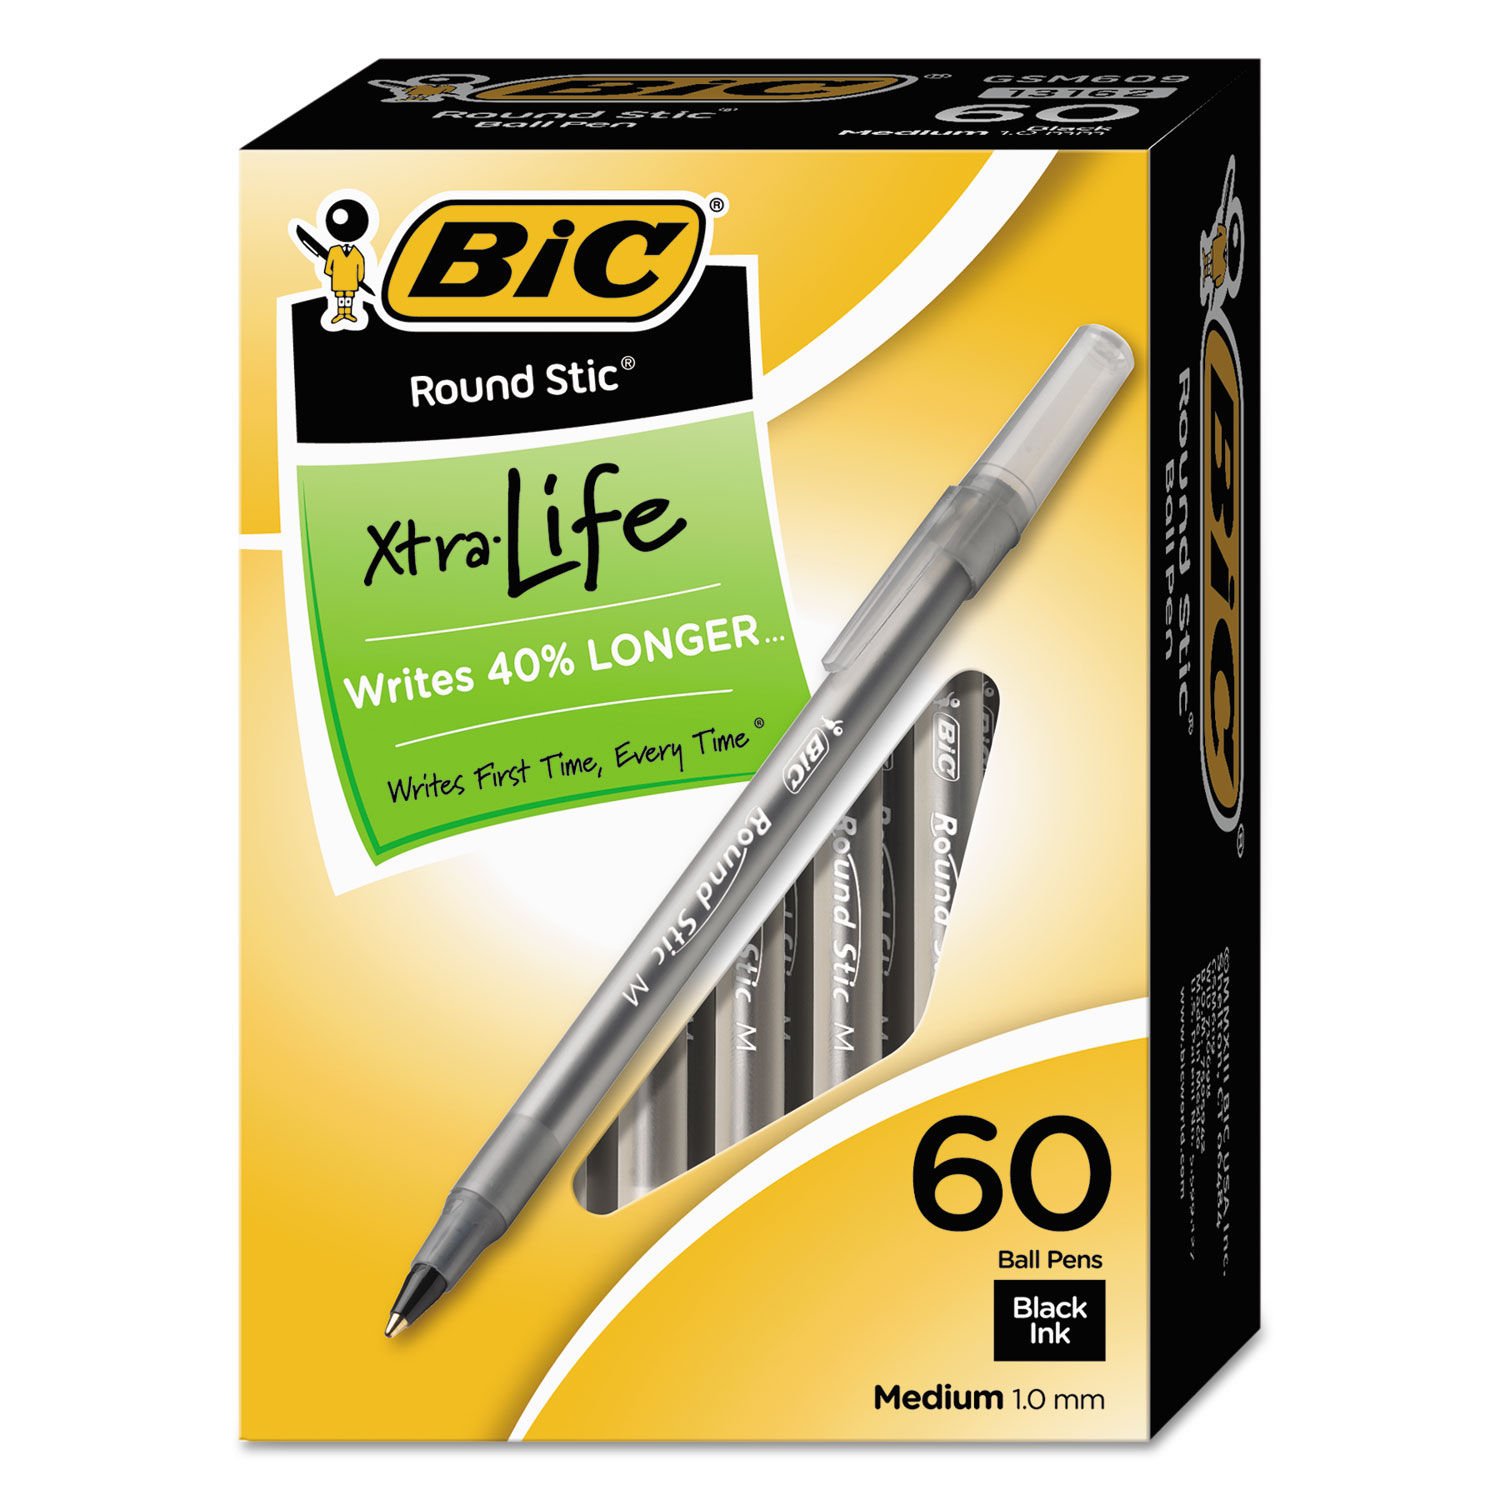 Round Stic Xtra Life Ballpoint Pen Value Pack by BICandreg; BICGSM609BK